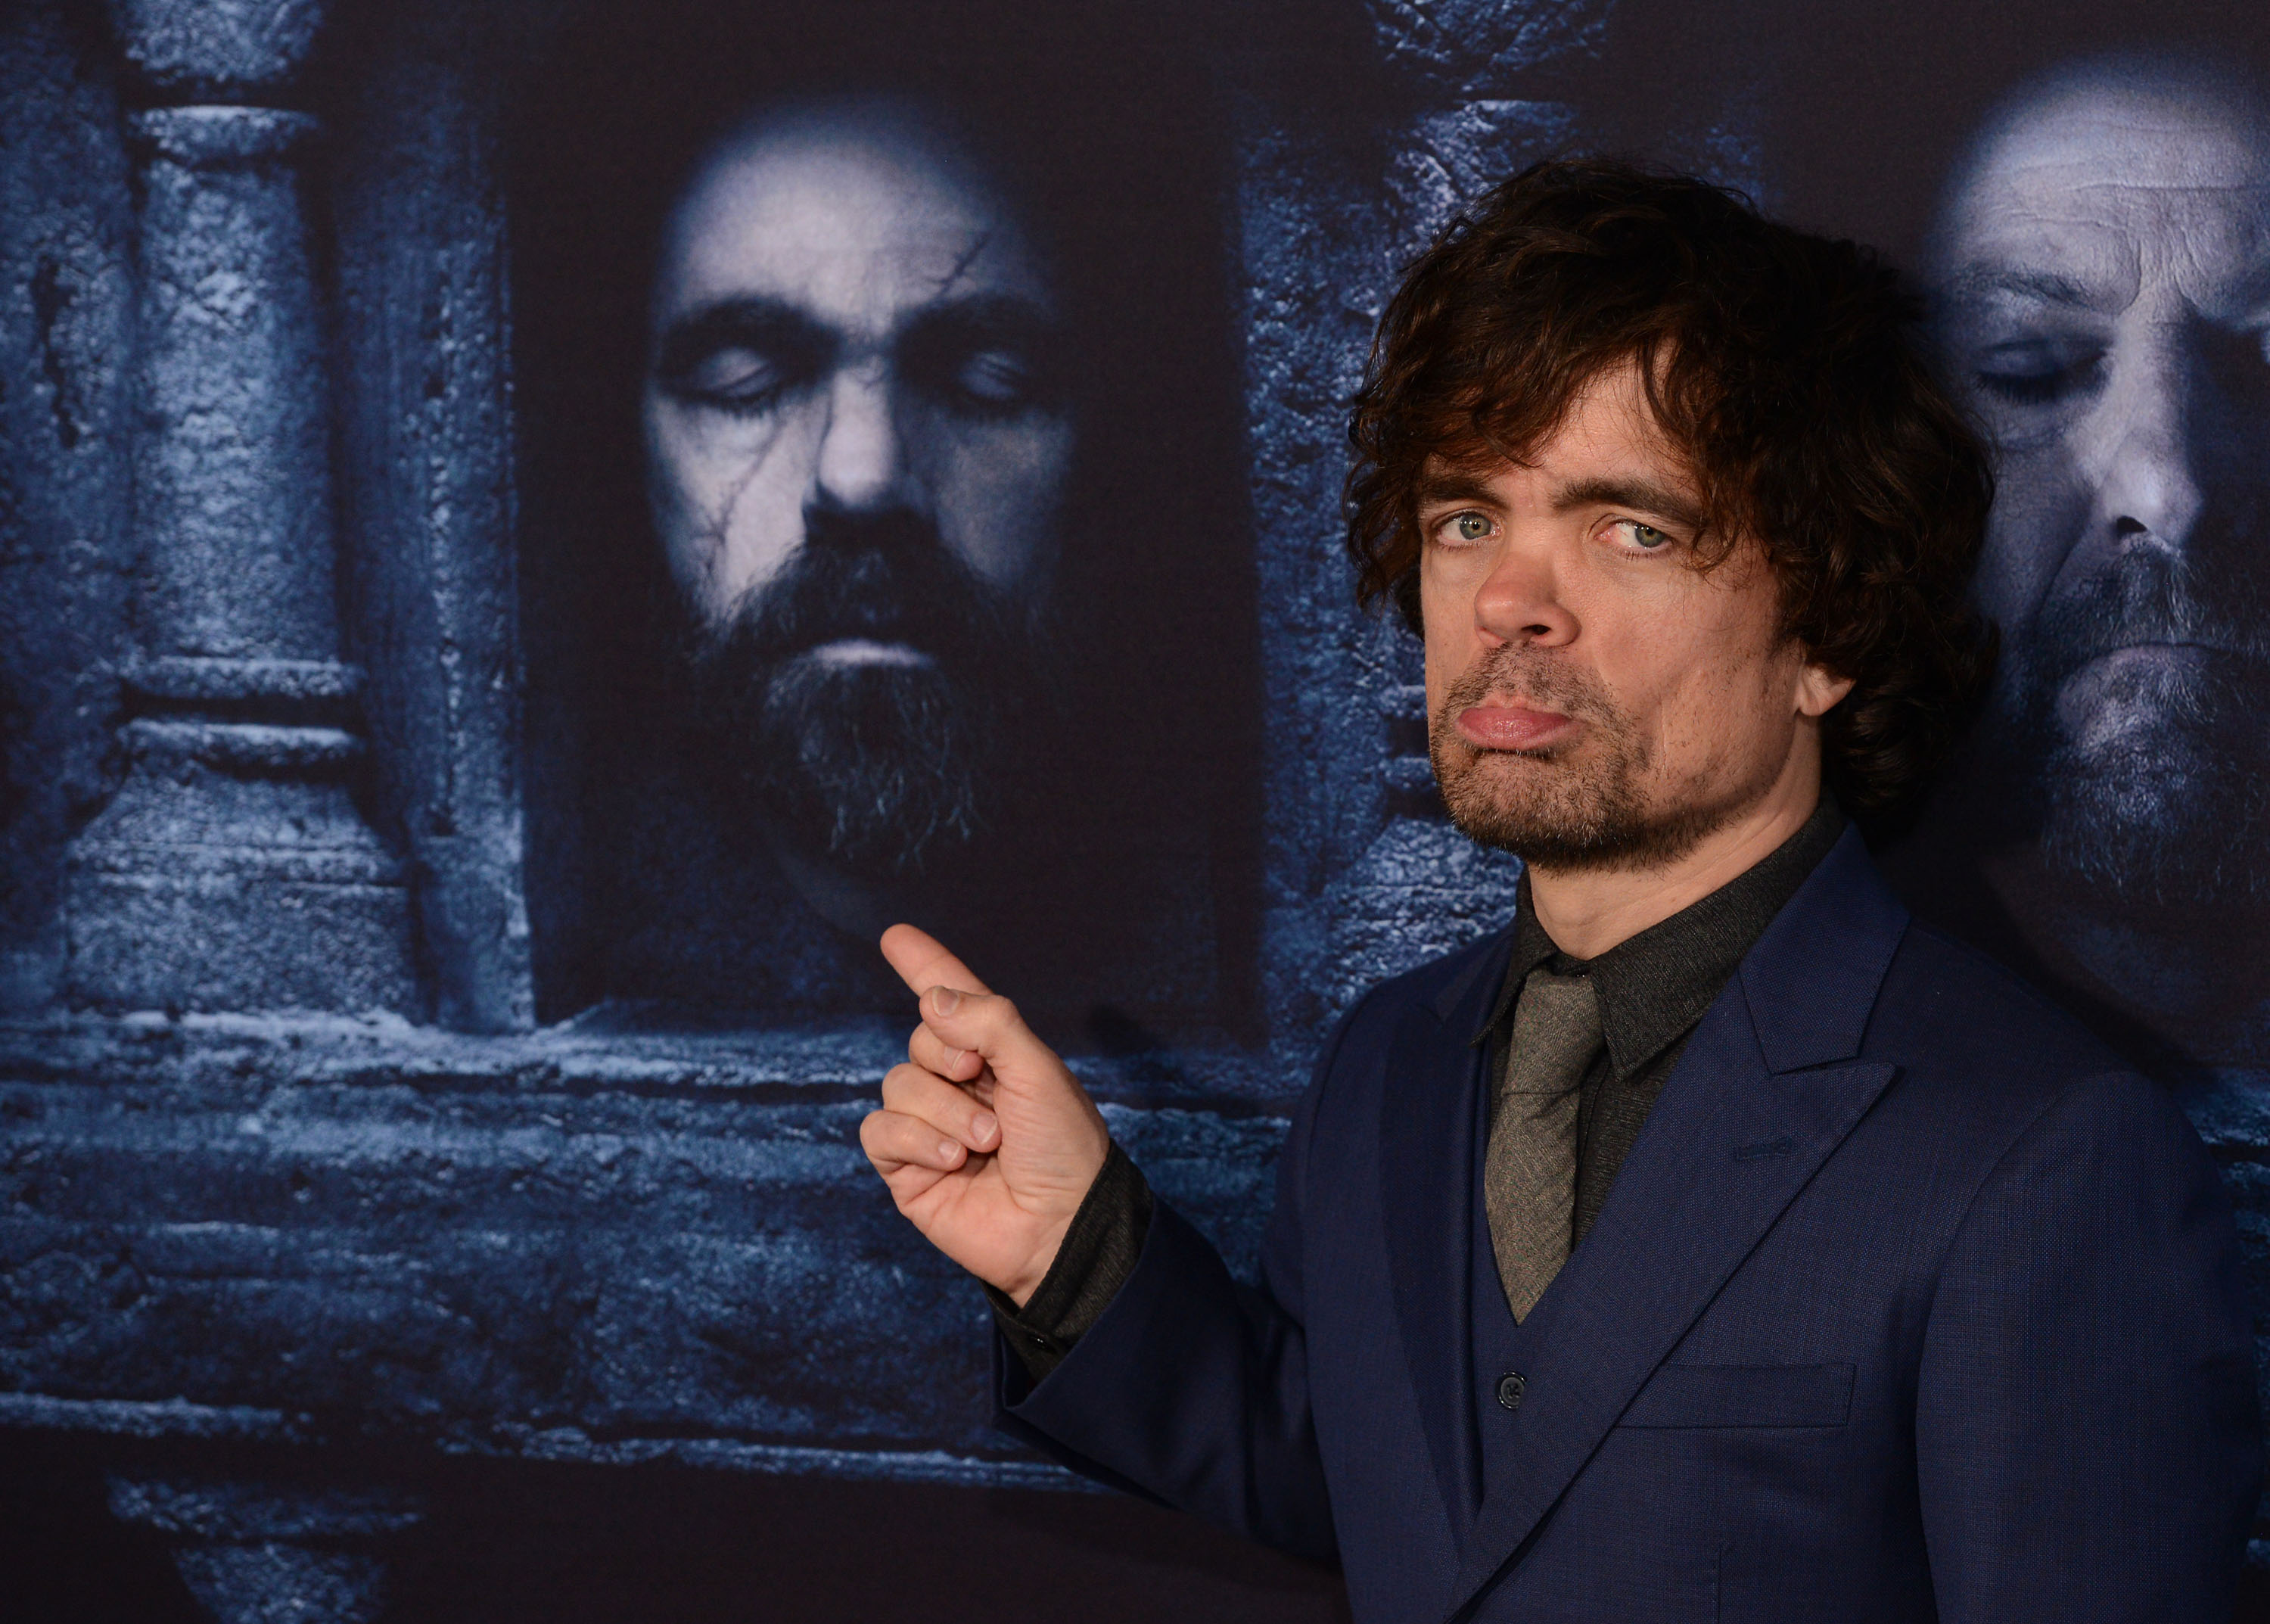 Actor Peter Dinklage arrives at the premiere of HBO's 'Game Of Thrones' Season 6 at TCL Chinese Theatre on April 10, 2016 in Hollywood, California. (C Flanigan—Getty Images)